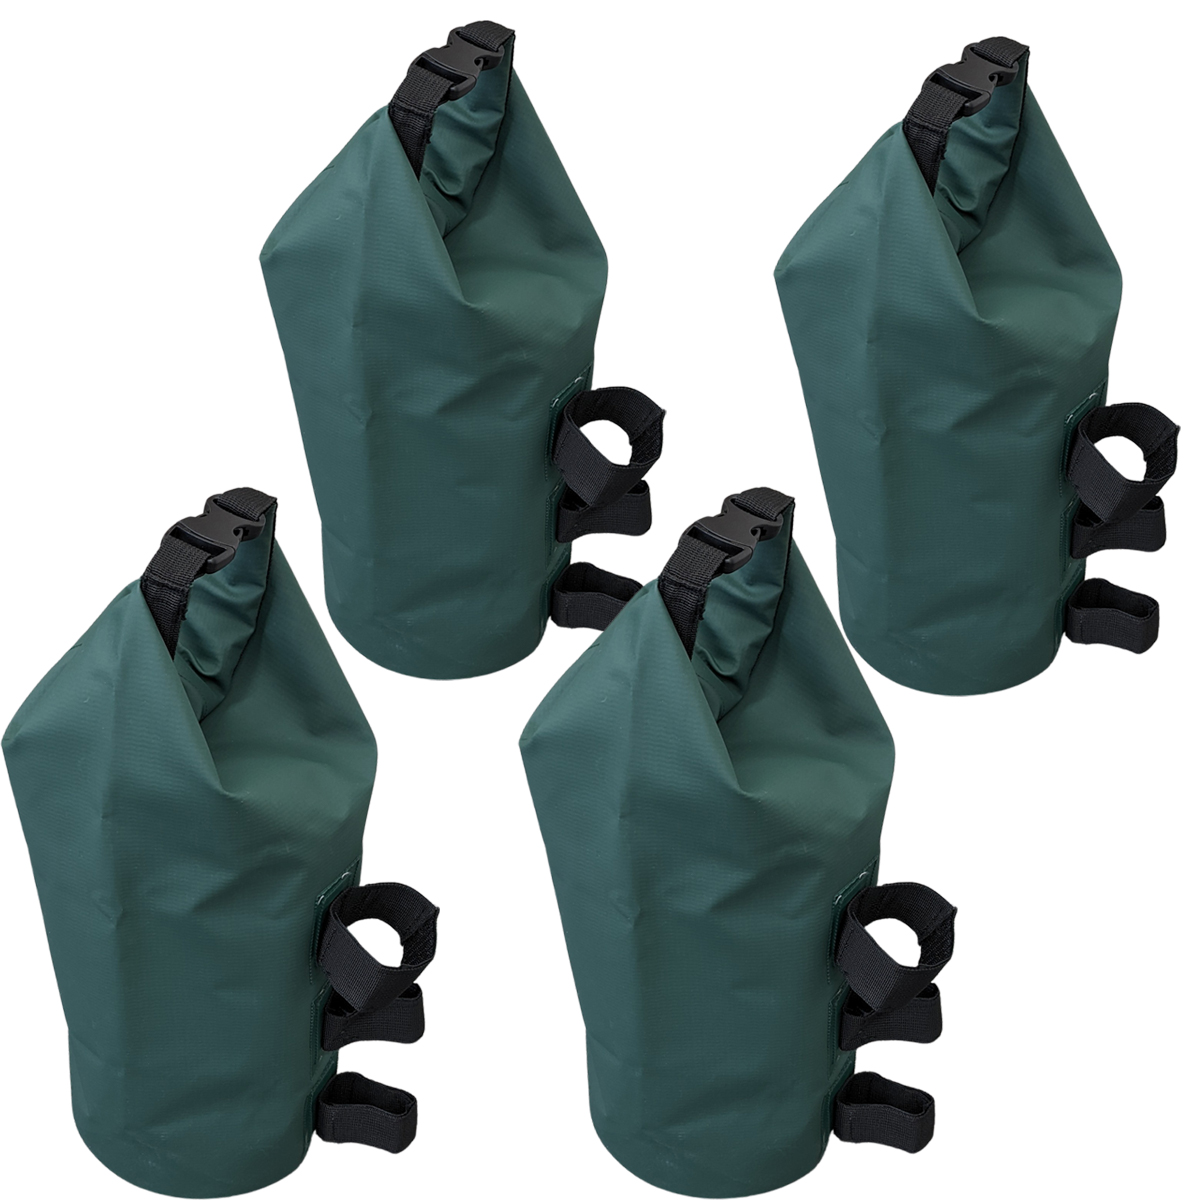  tent for -ply .4 piece set green multi weight 10kg water bag Sand bag sand for water for 